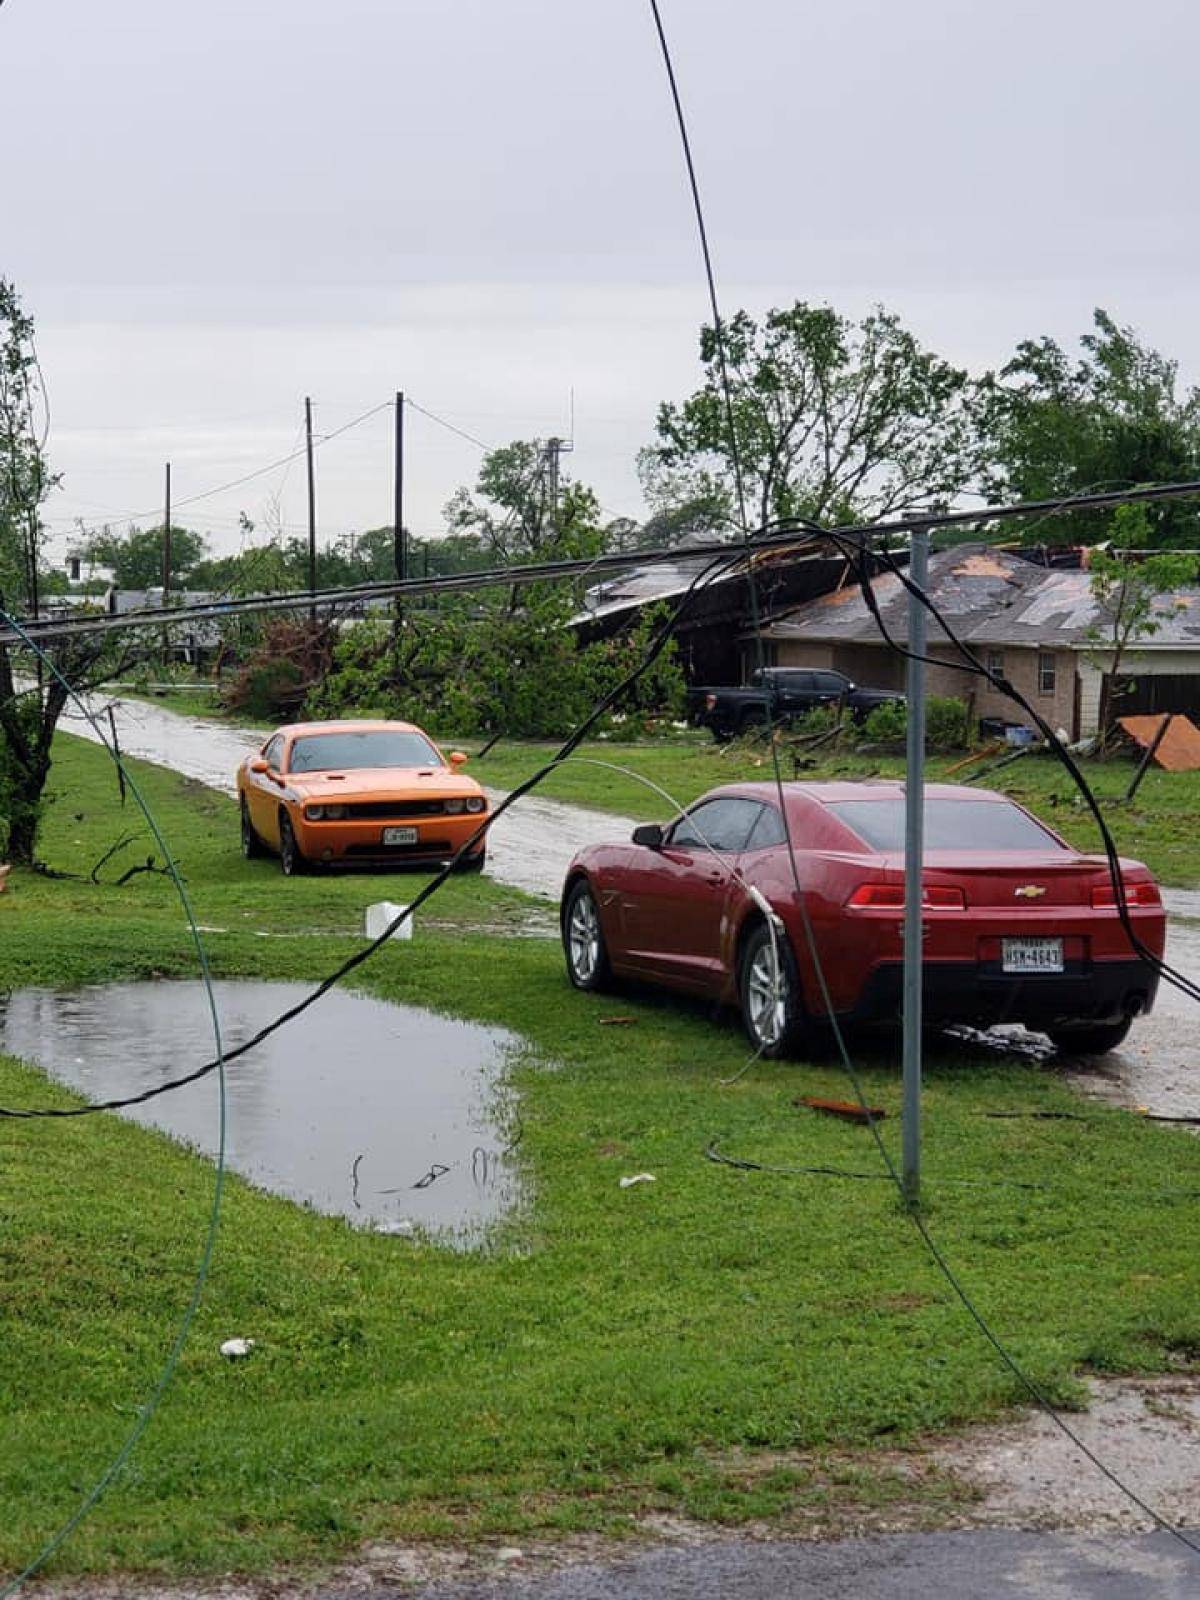 Cars and debris seen in the aftermath of a tornado in Franklin, Texas, U.S., in this image from social media